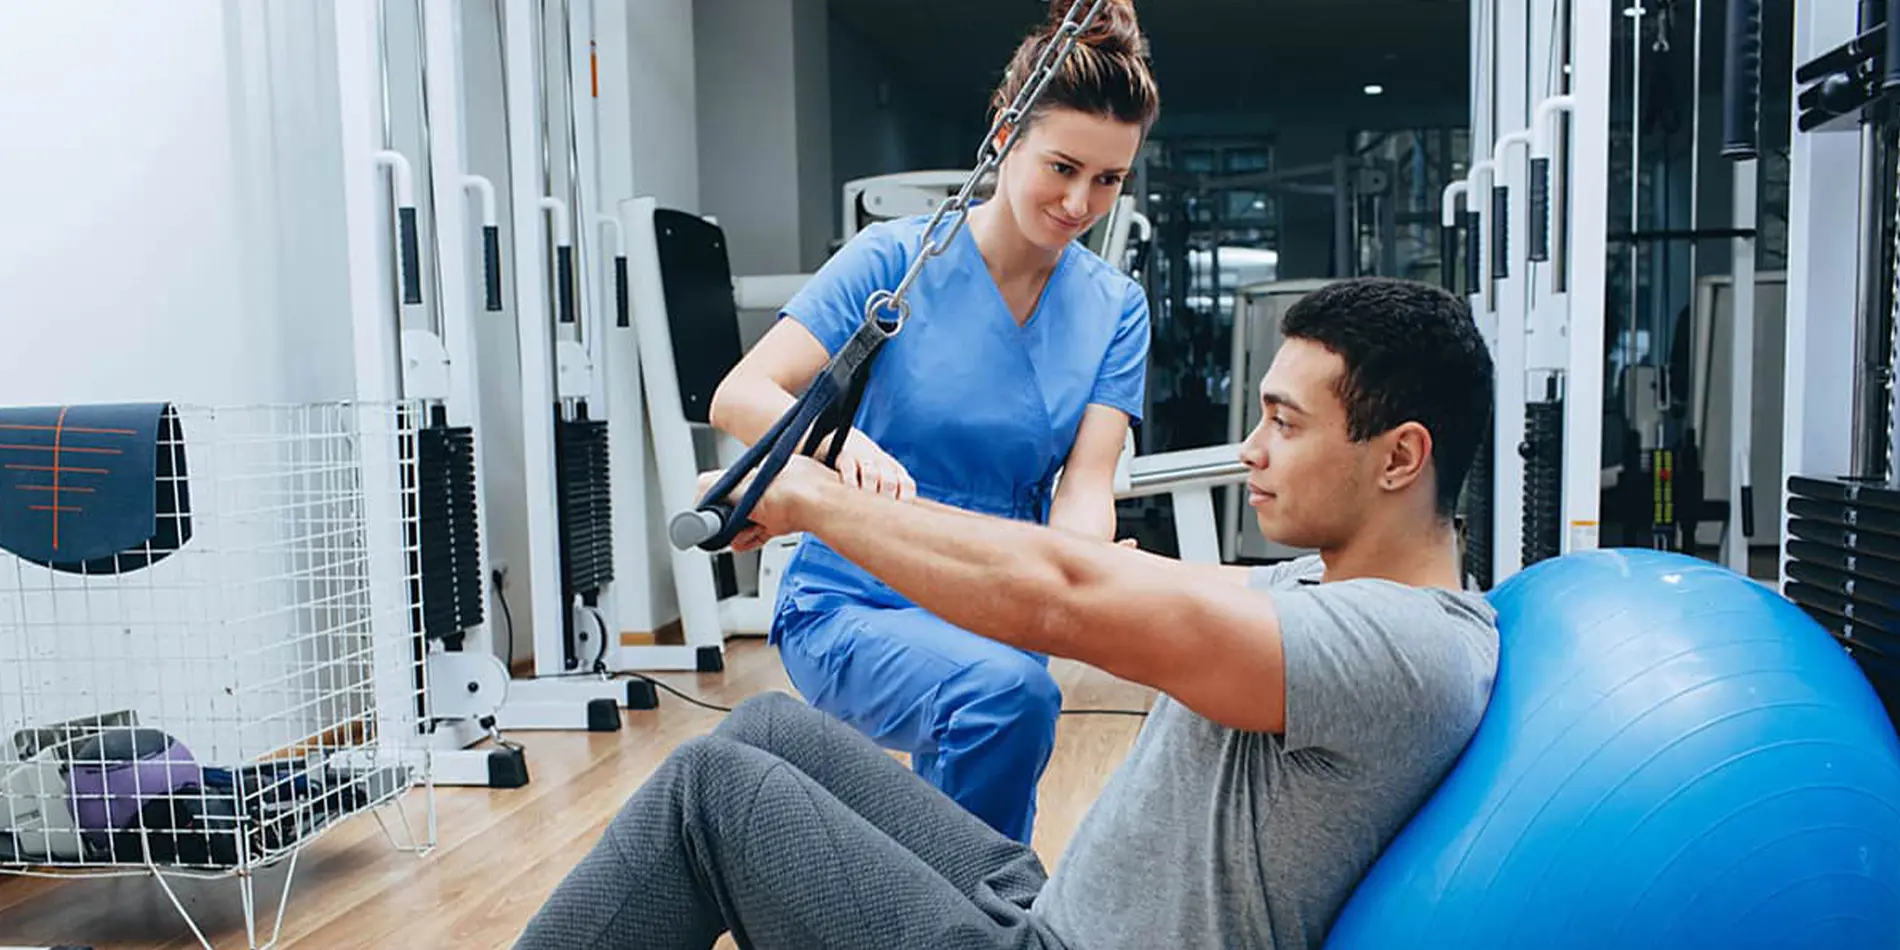 Two people are in a gym. One is doing exercises on an exercise ball. The other is wearing scrubs and aiding in the exercise.